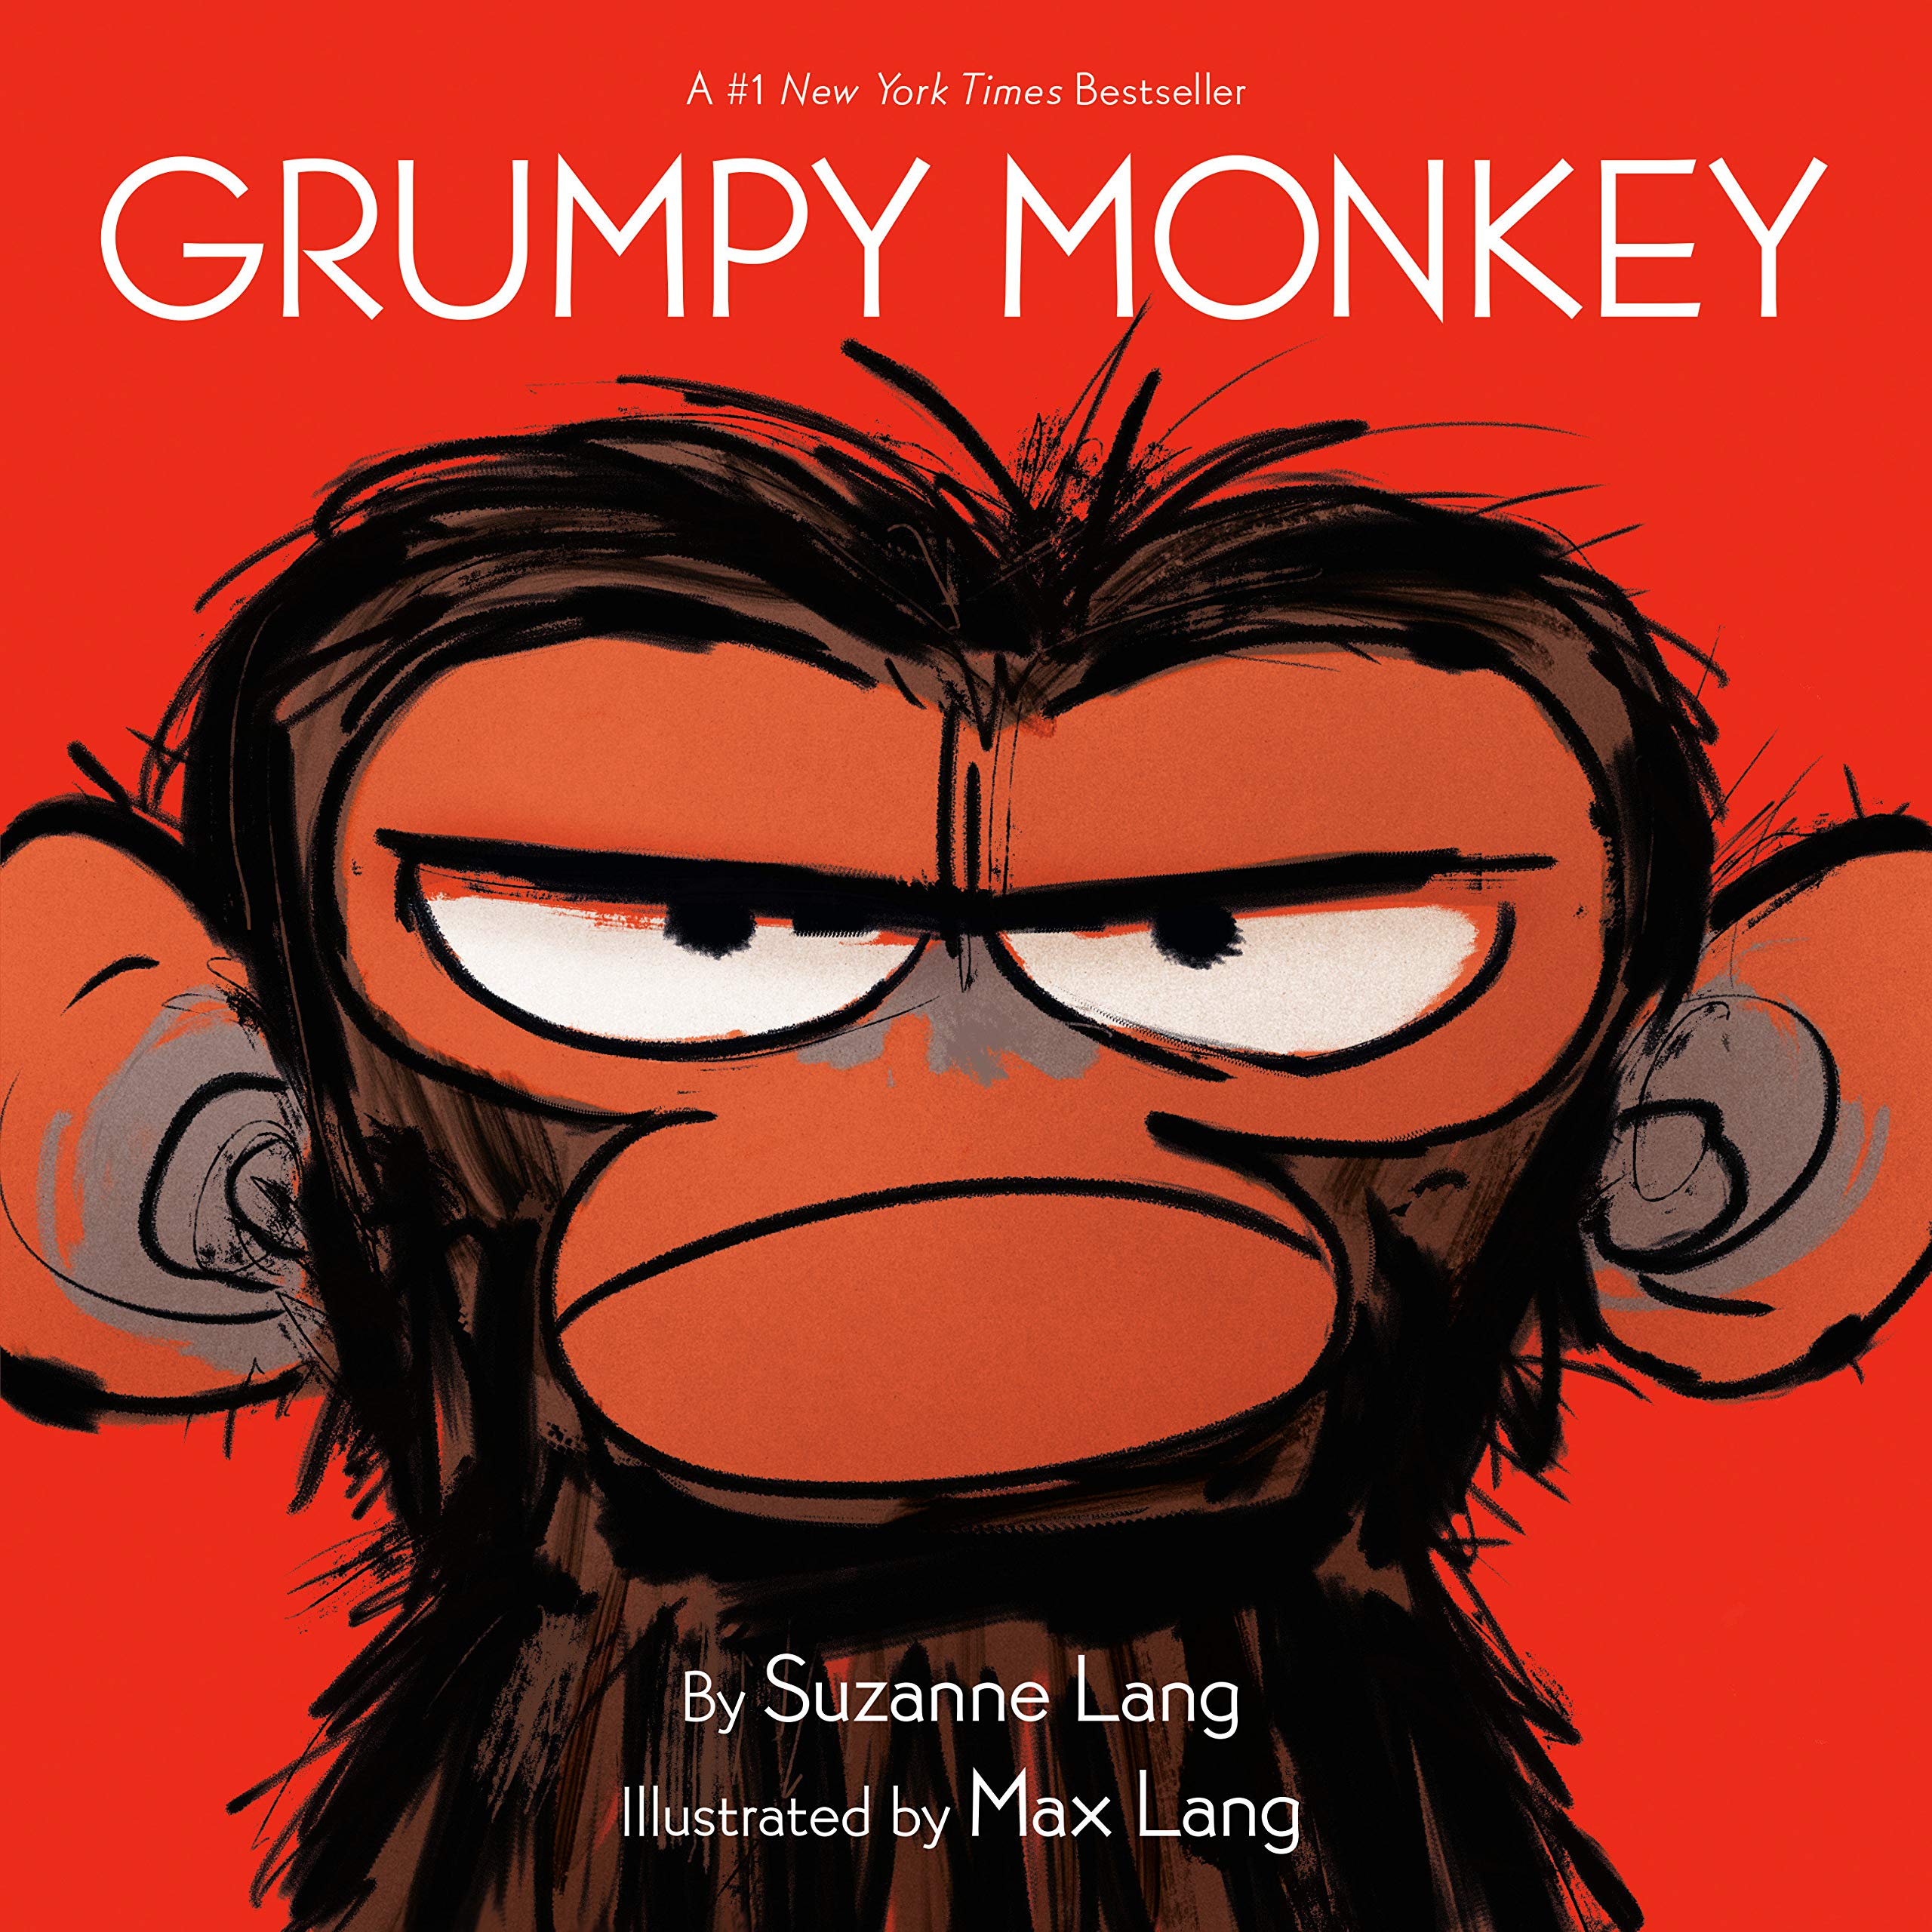 Grumpy Monkey by suzanne Lang, illustrated by Max Lang